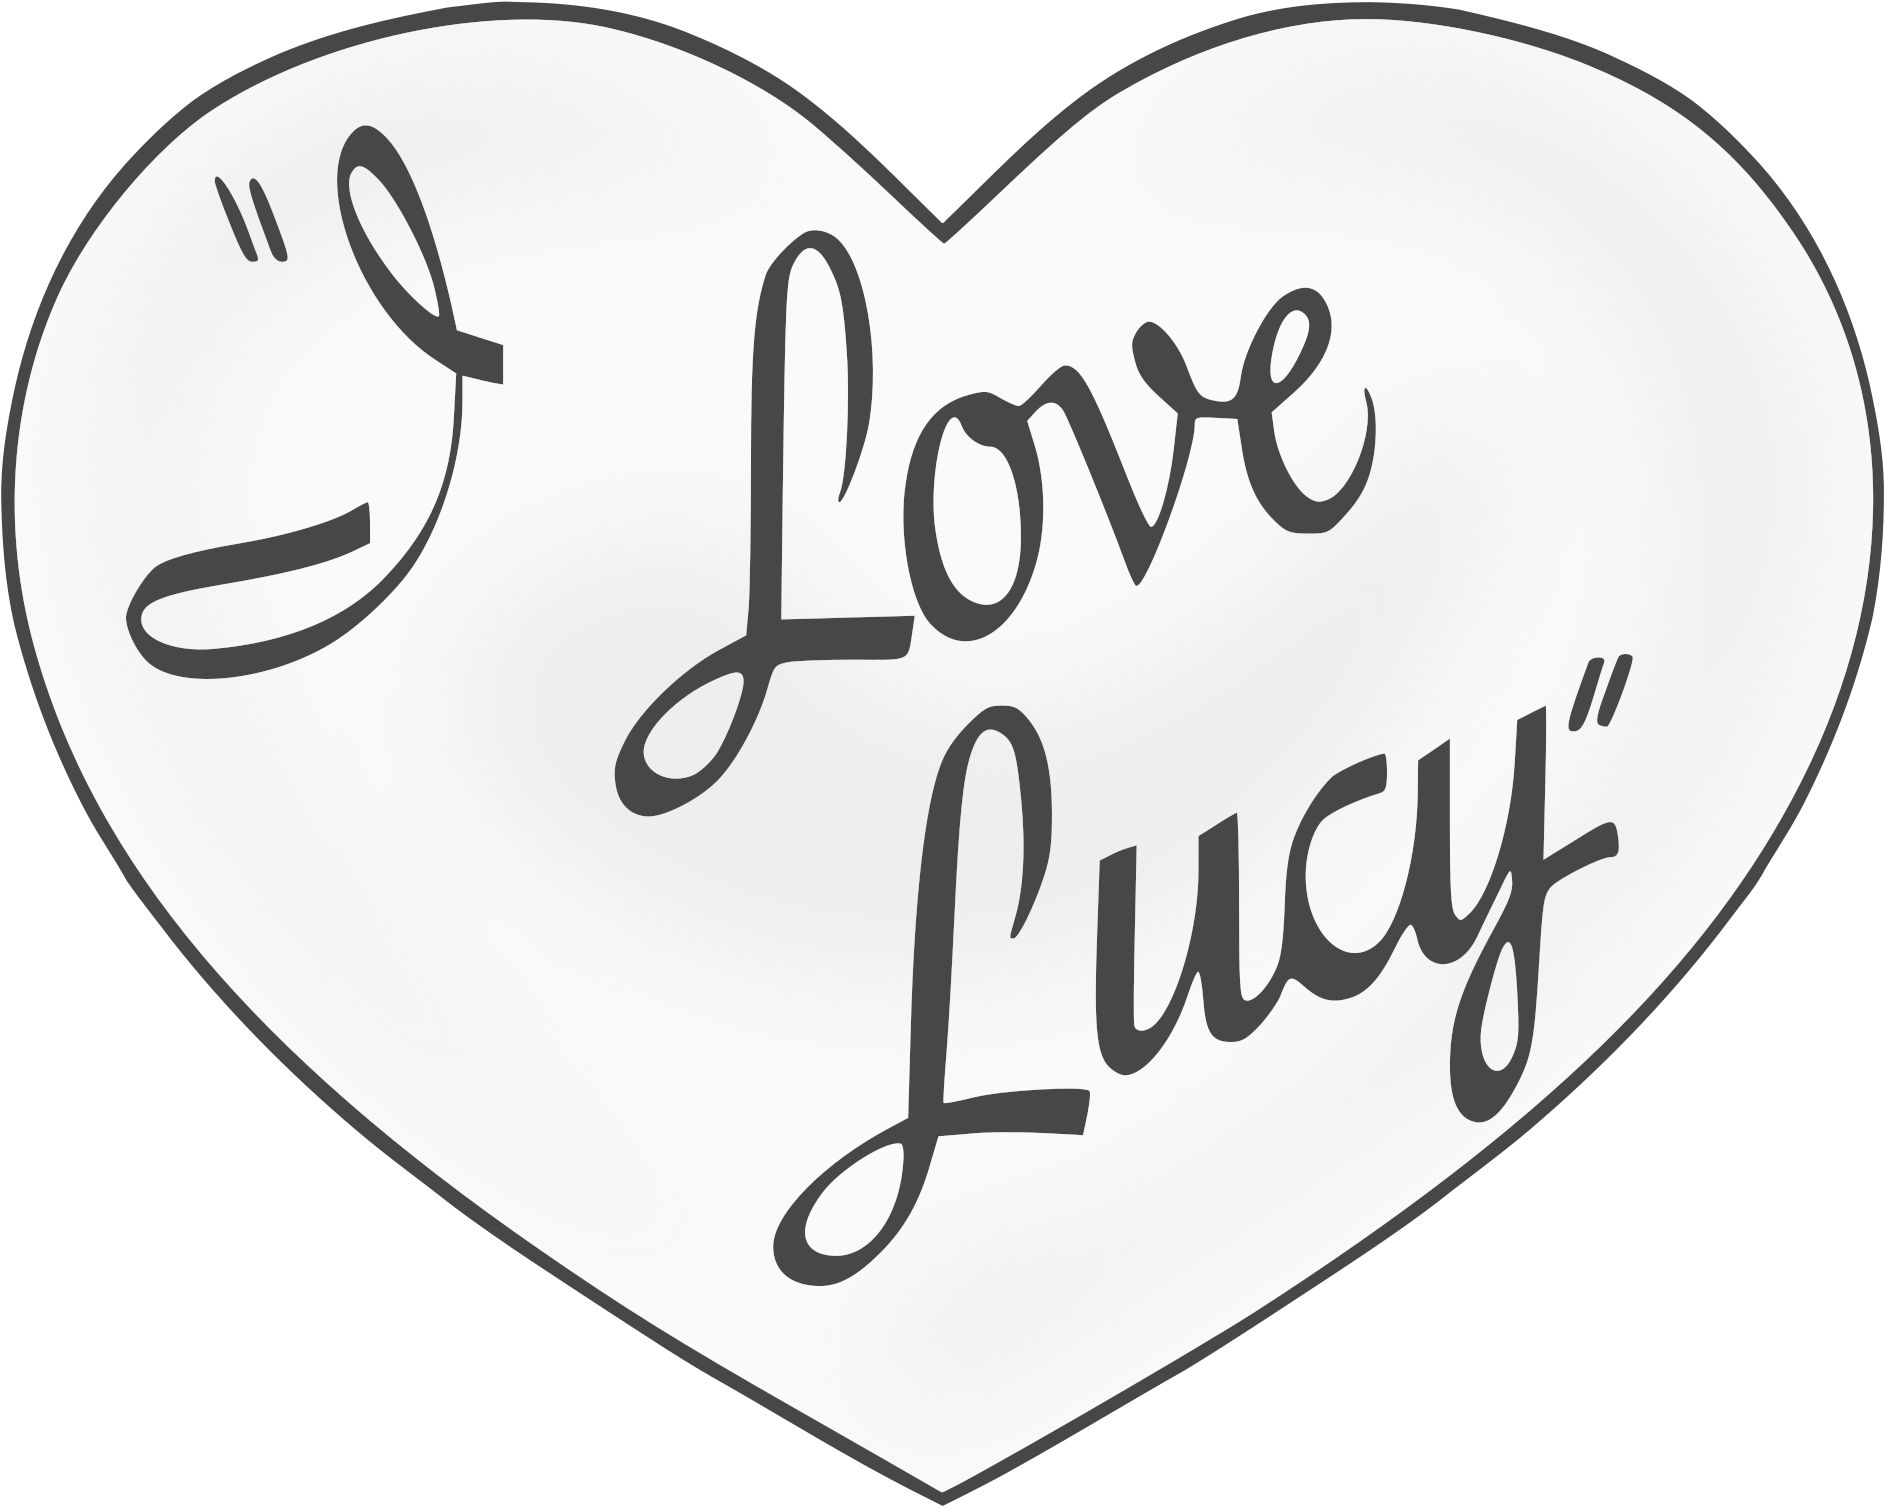 Download Love Lucy Heart Graphic | Wallpapers.com